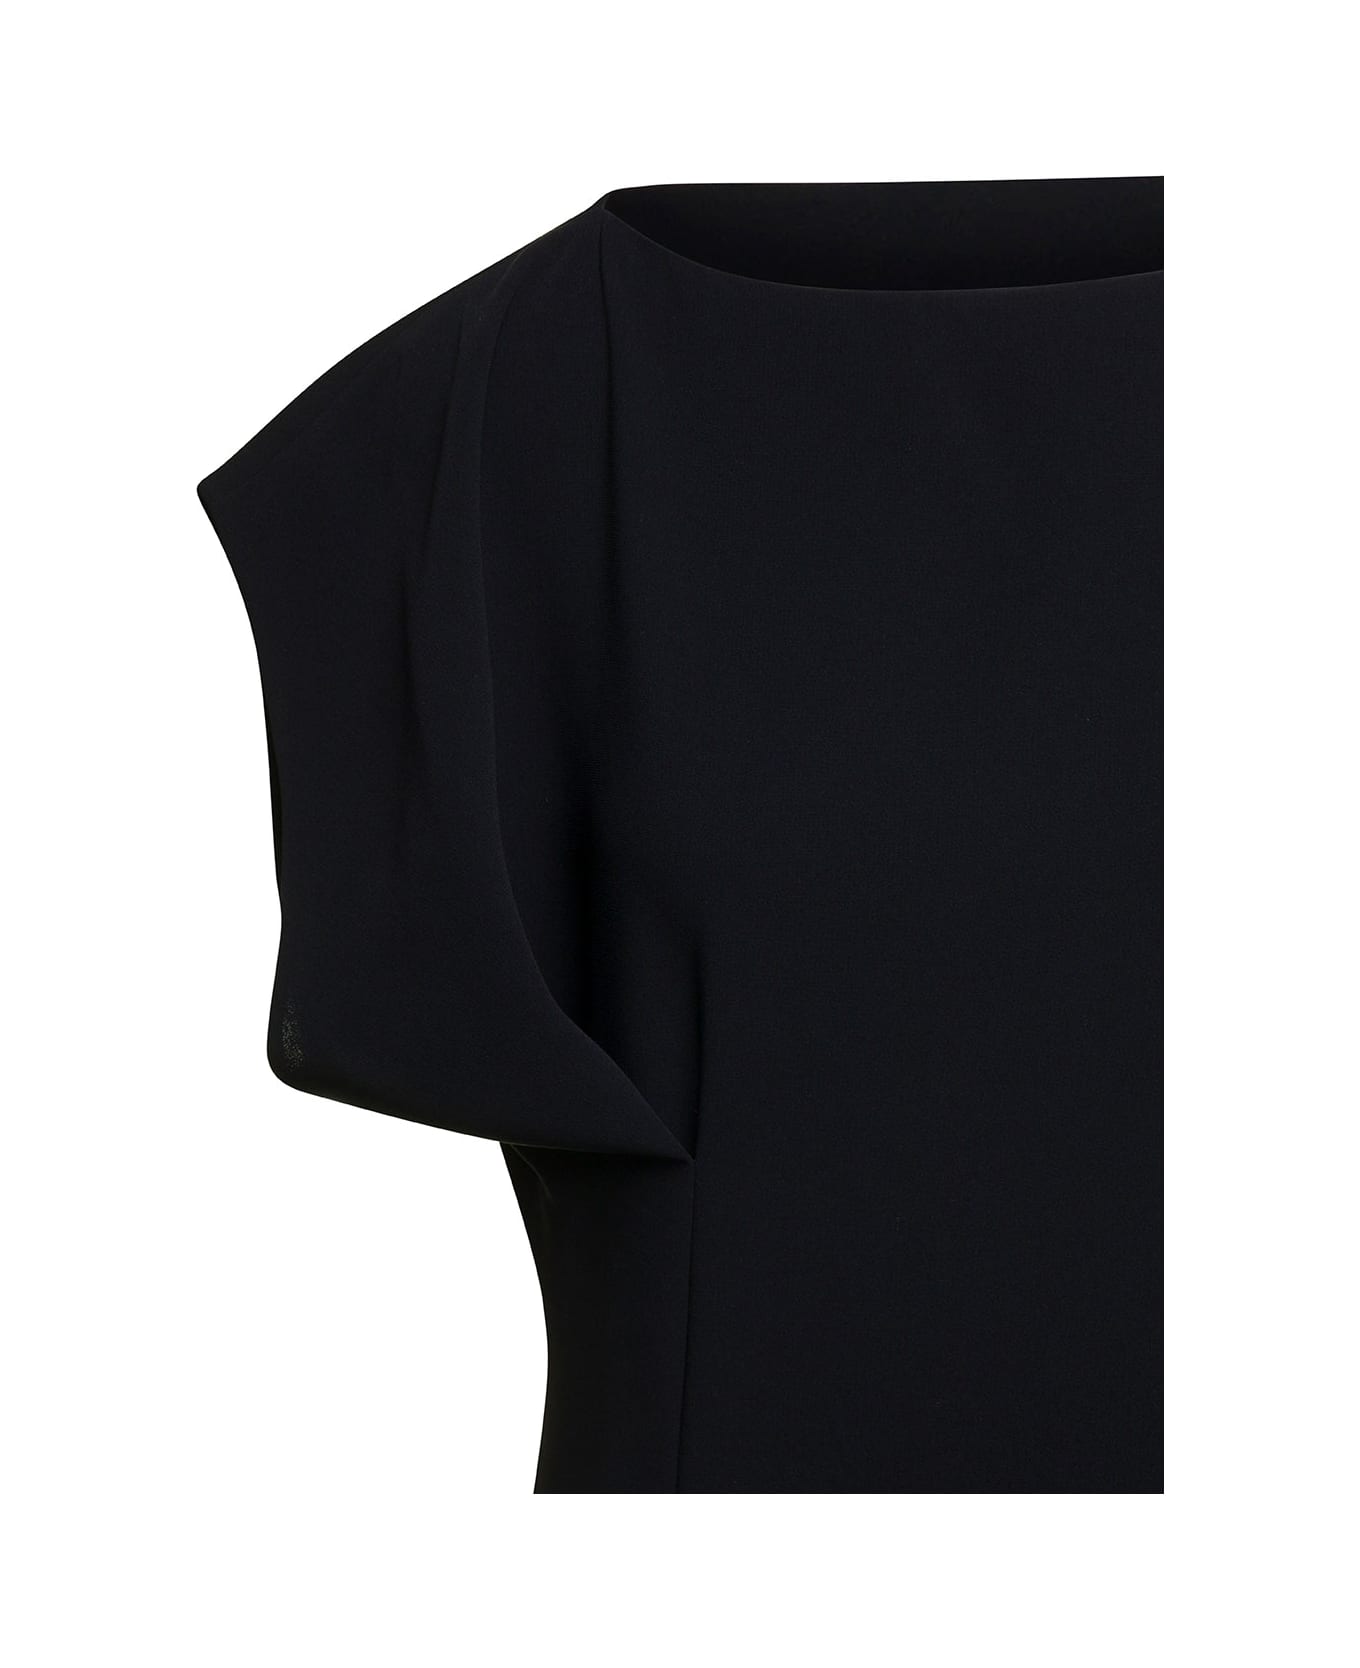 The Row 'blathine' Long Asymetric Black Dress With Concealed Zip Closure In Triacetate Blend Woman - Black